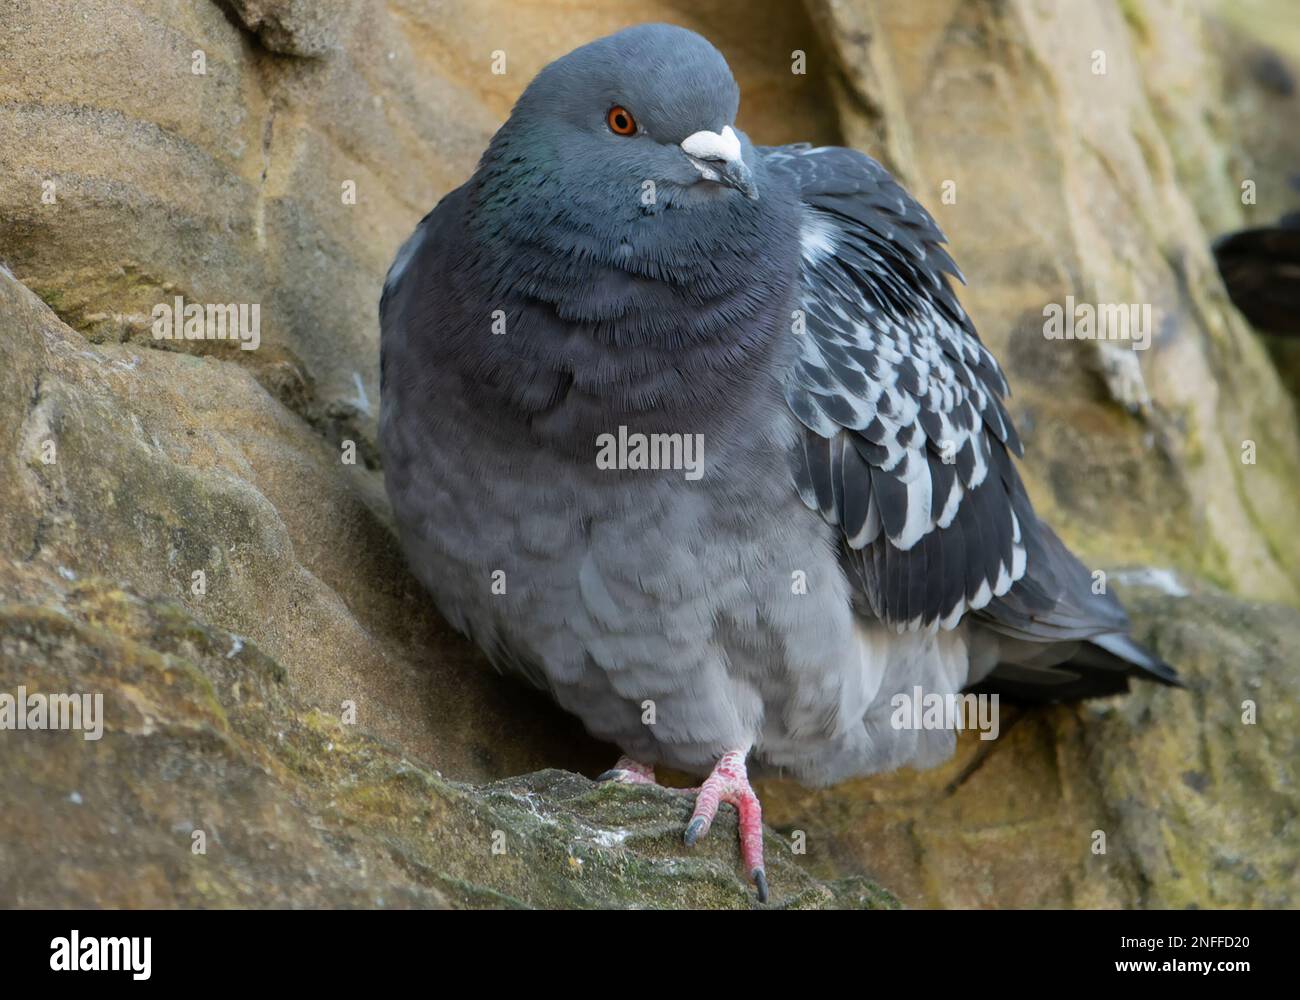 A Pigeon in a cave Stock Photo